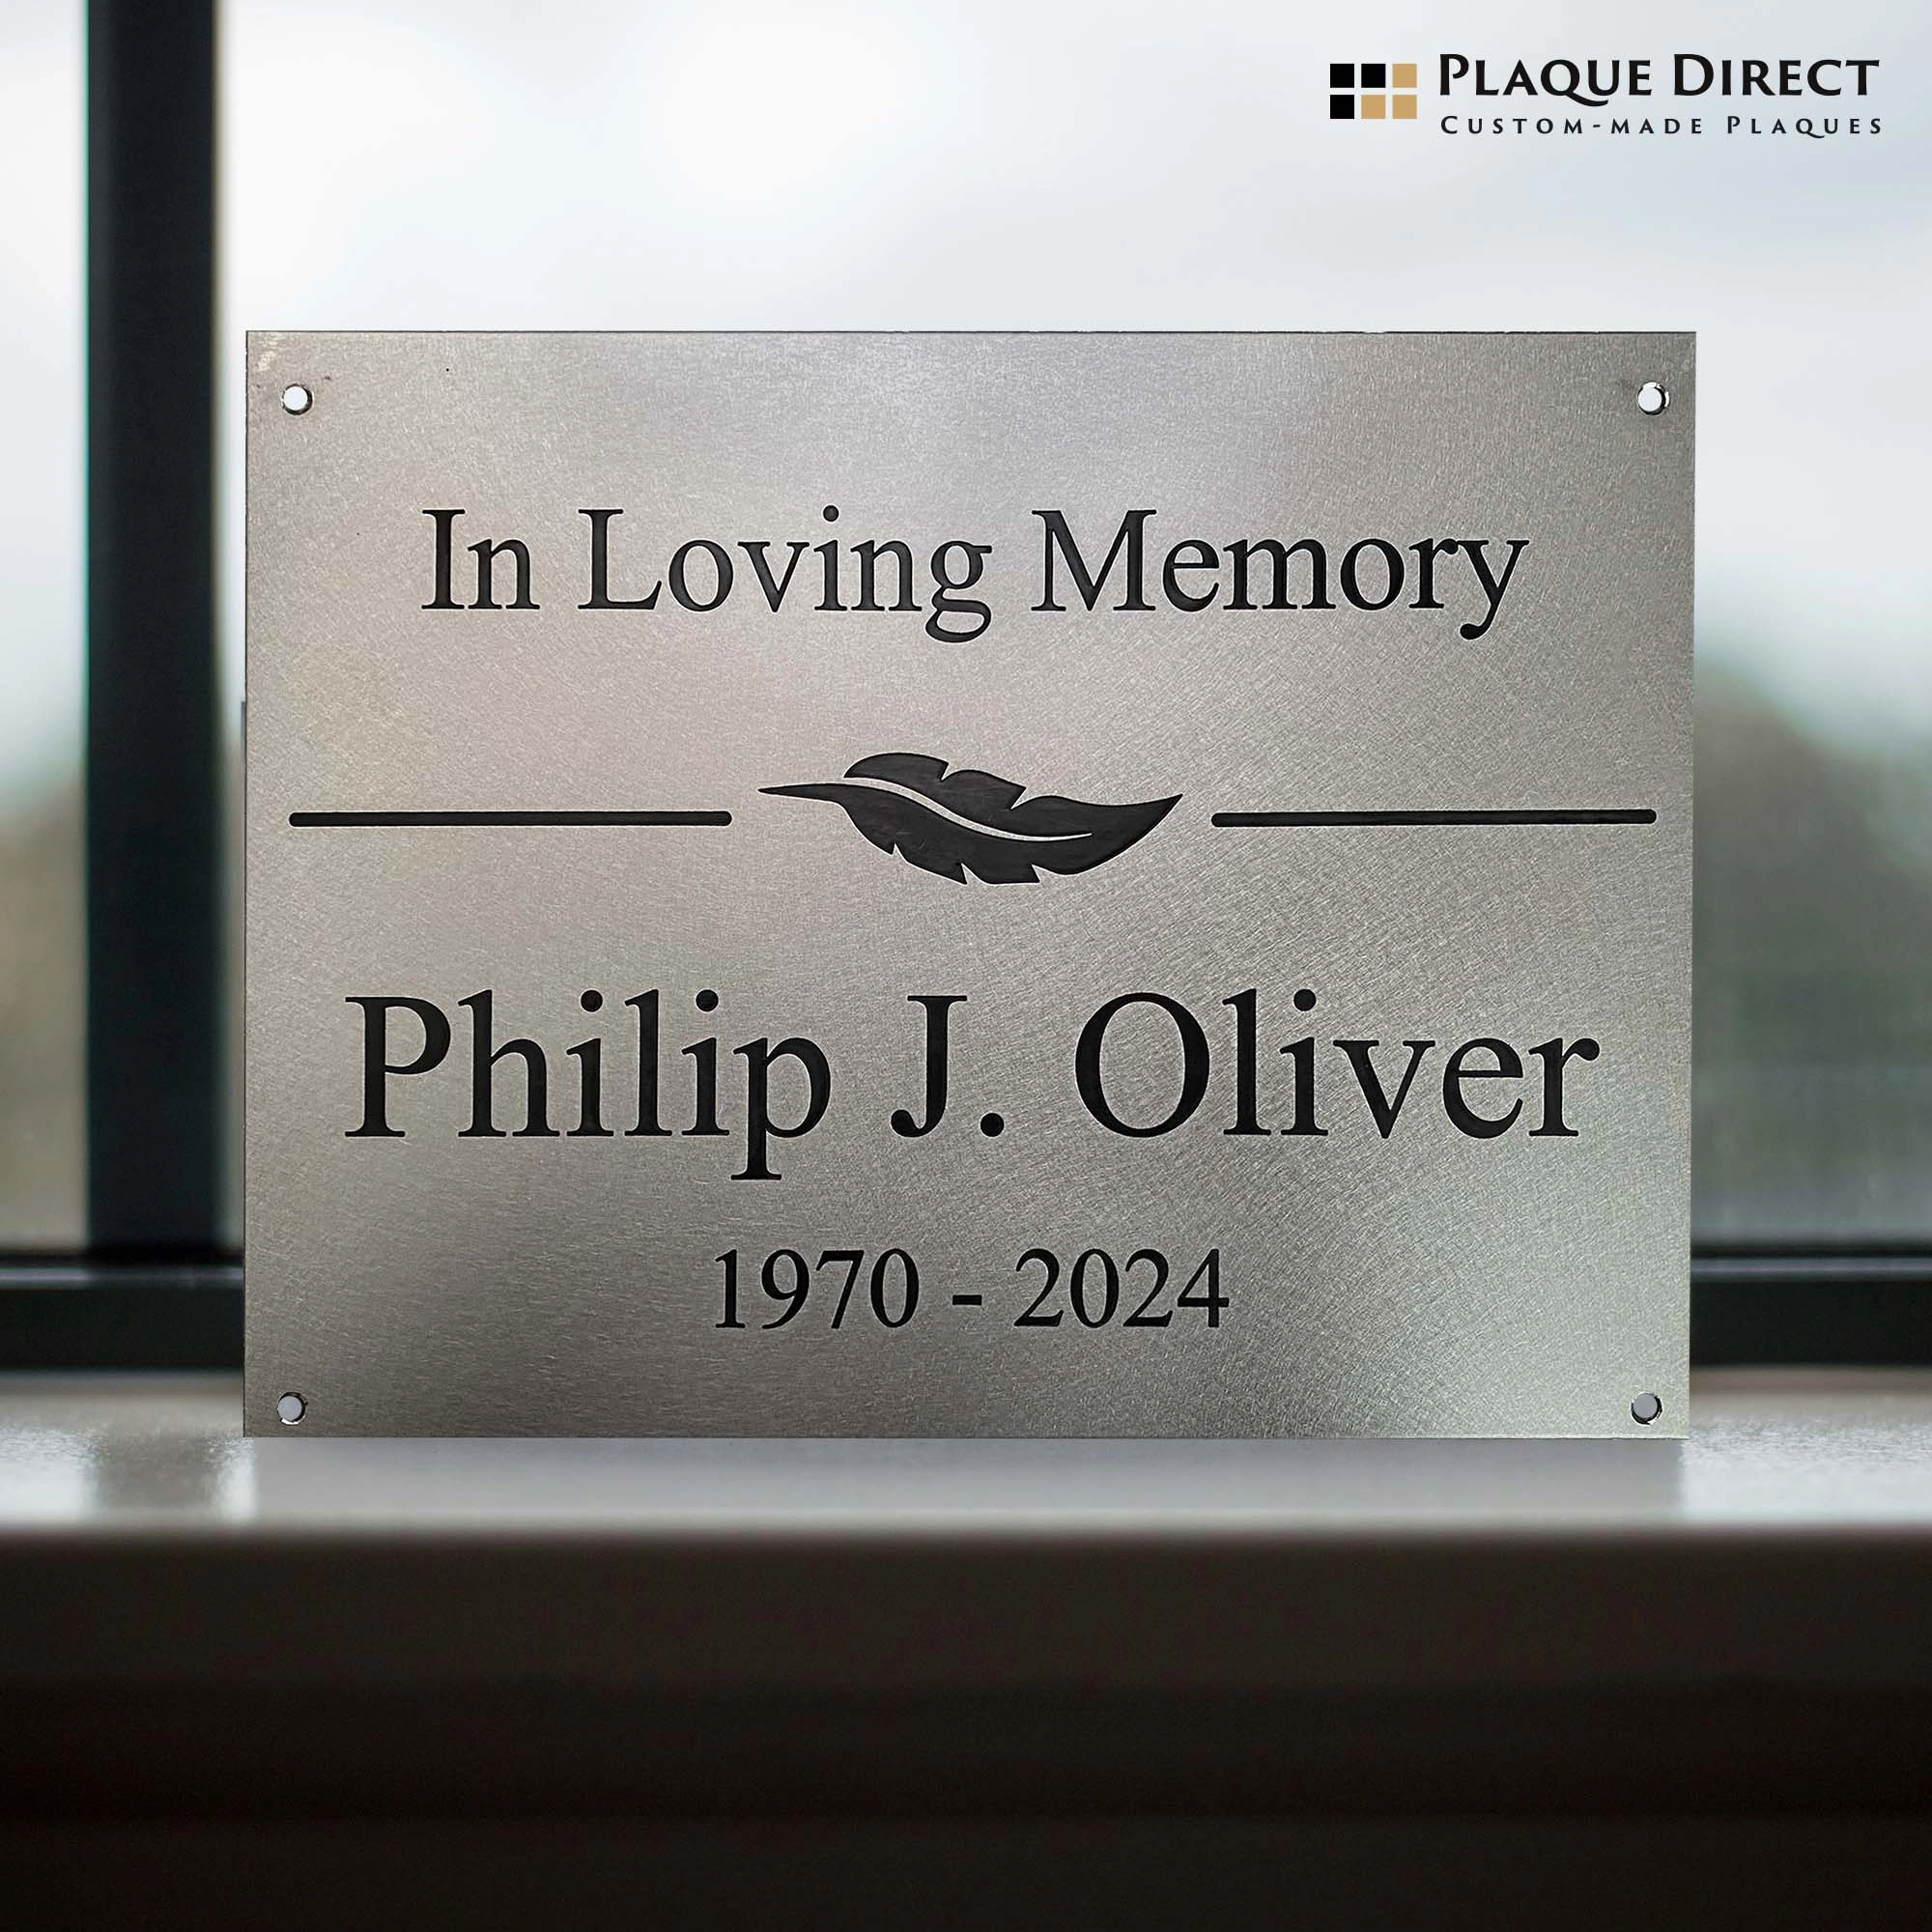 Stainless Steel Plaque (In loving memory design) - Stainless Steel Plaque (In loving memory design)